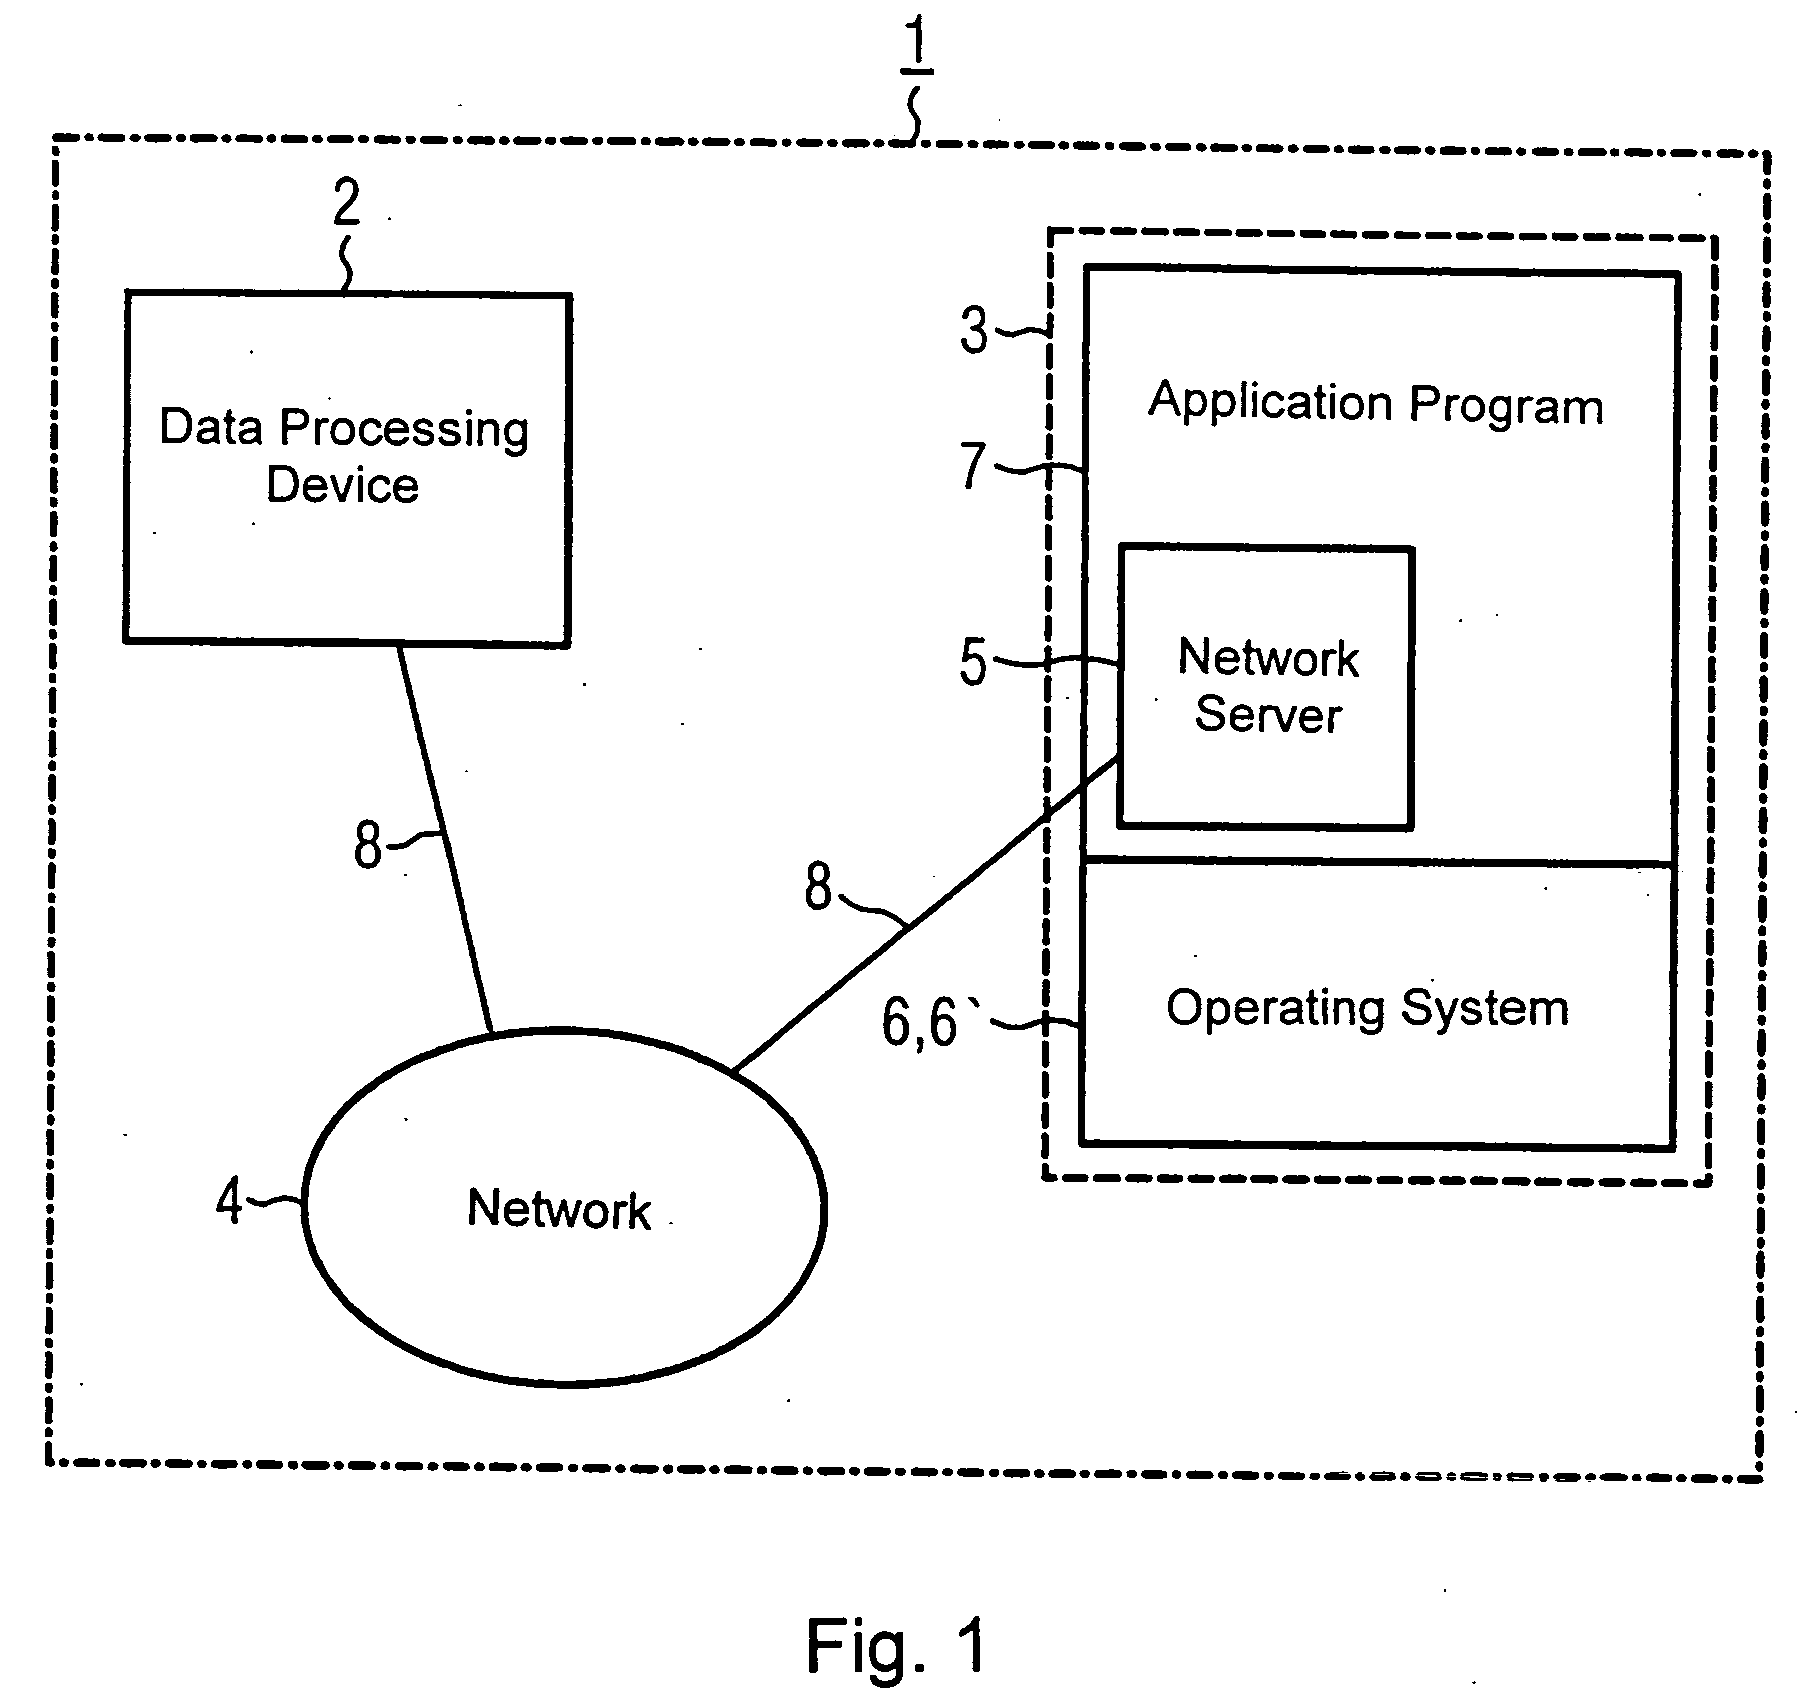 Method for updating an automation system